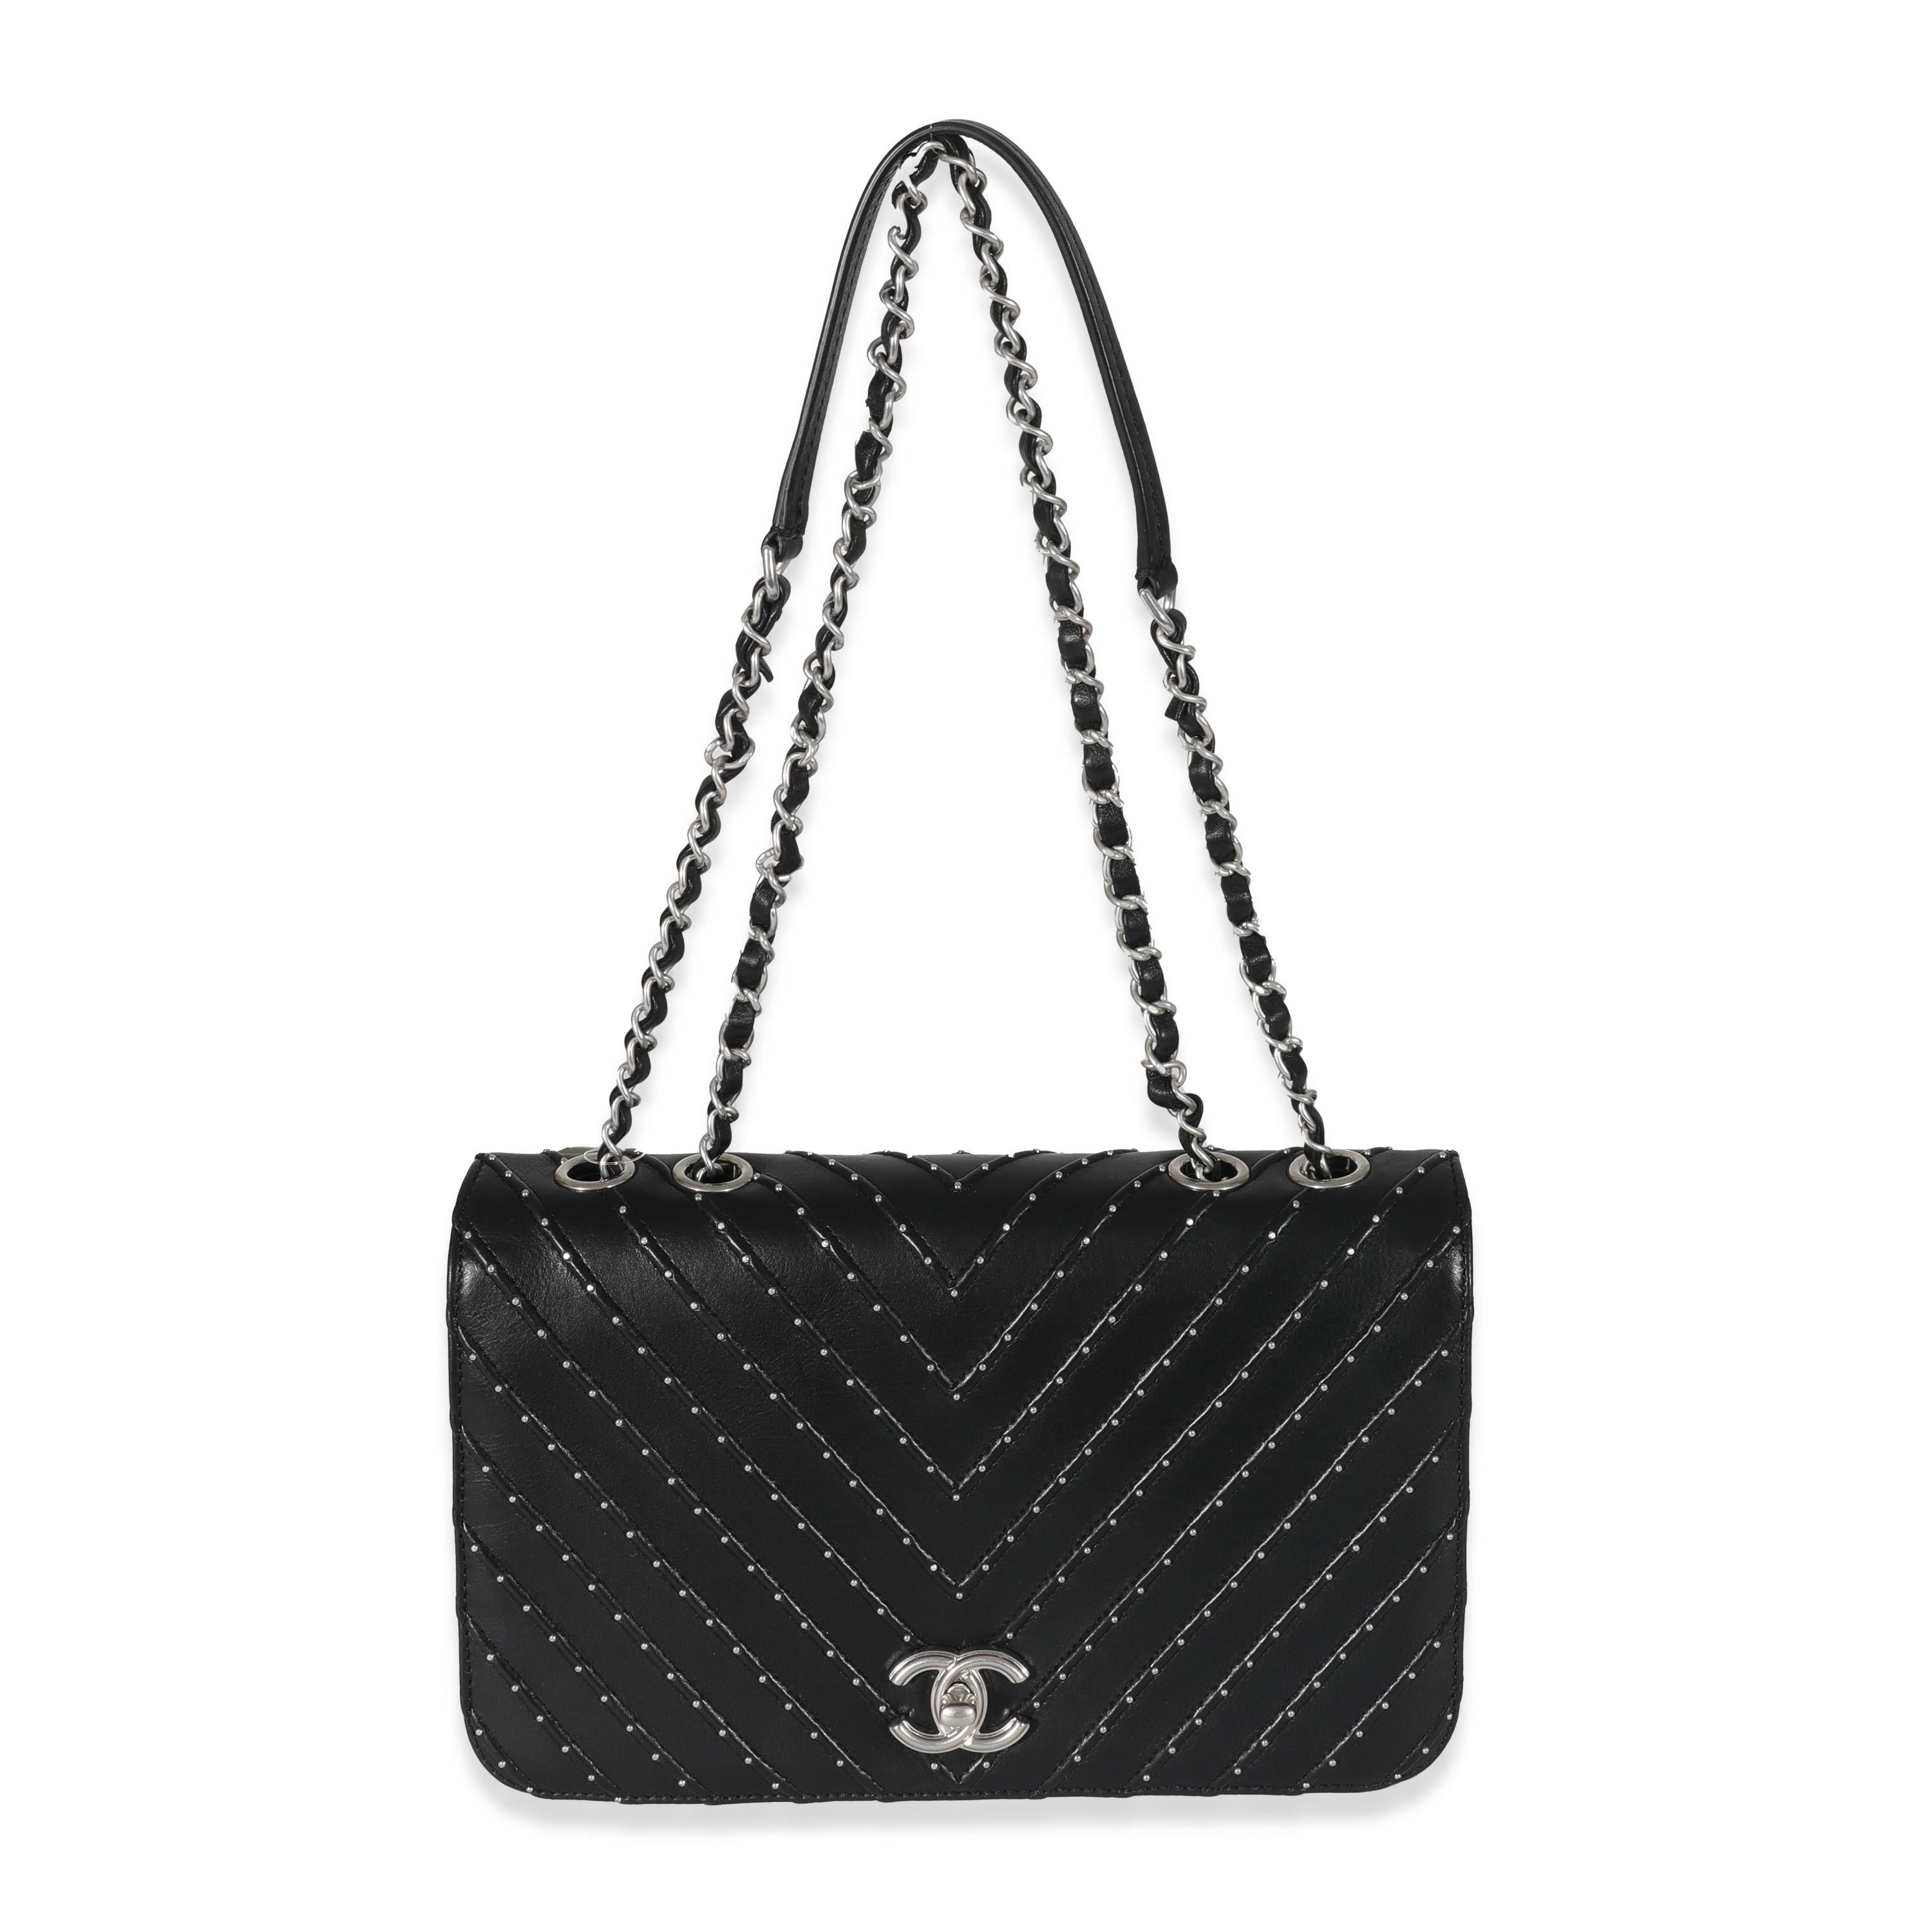 Listing Title: Chanel Black Calfskin Chevron Small Stud Wars Flap Bag
SKU: 130627
Condition: Pre-owned 
Condition Description: A timeless classic that never goes out of style, the flap bag from Chanel dates back to 1955 and has seen a number of